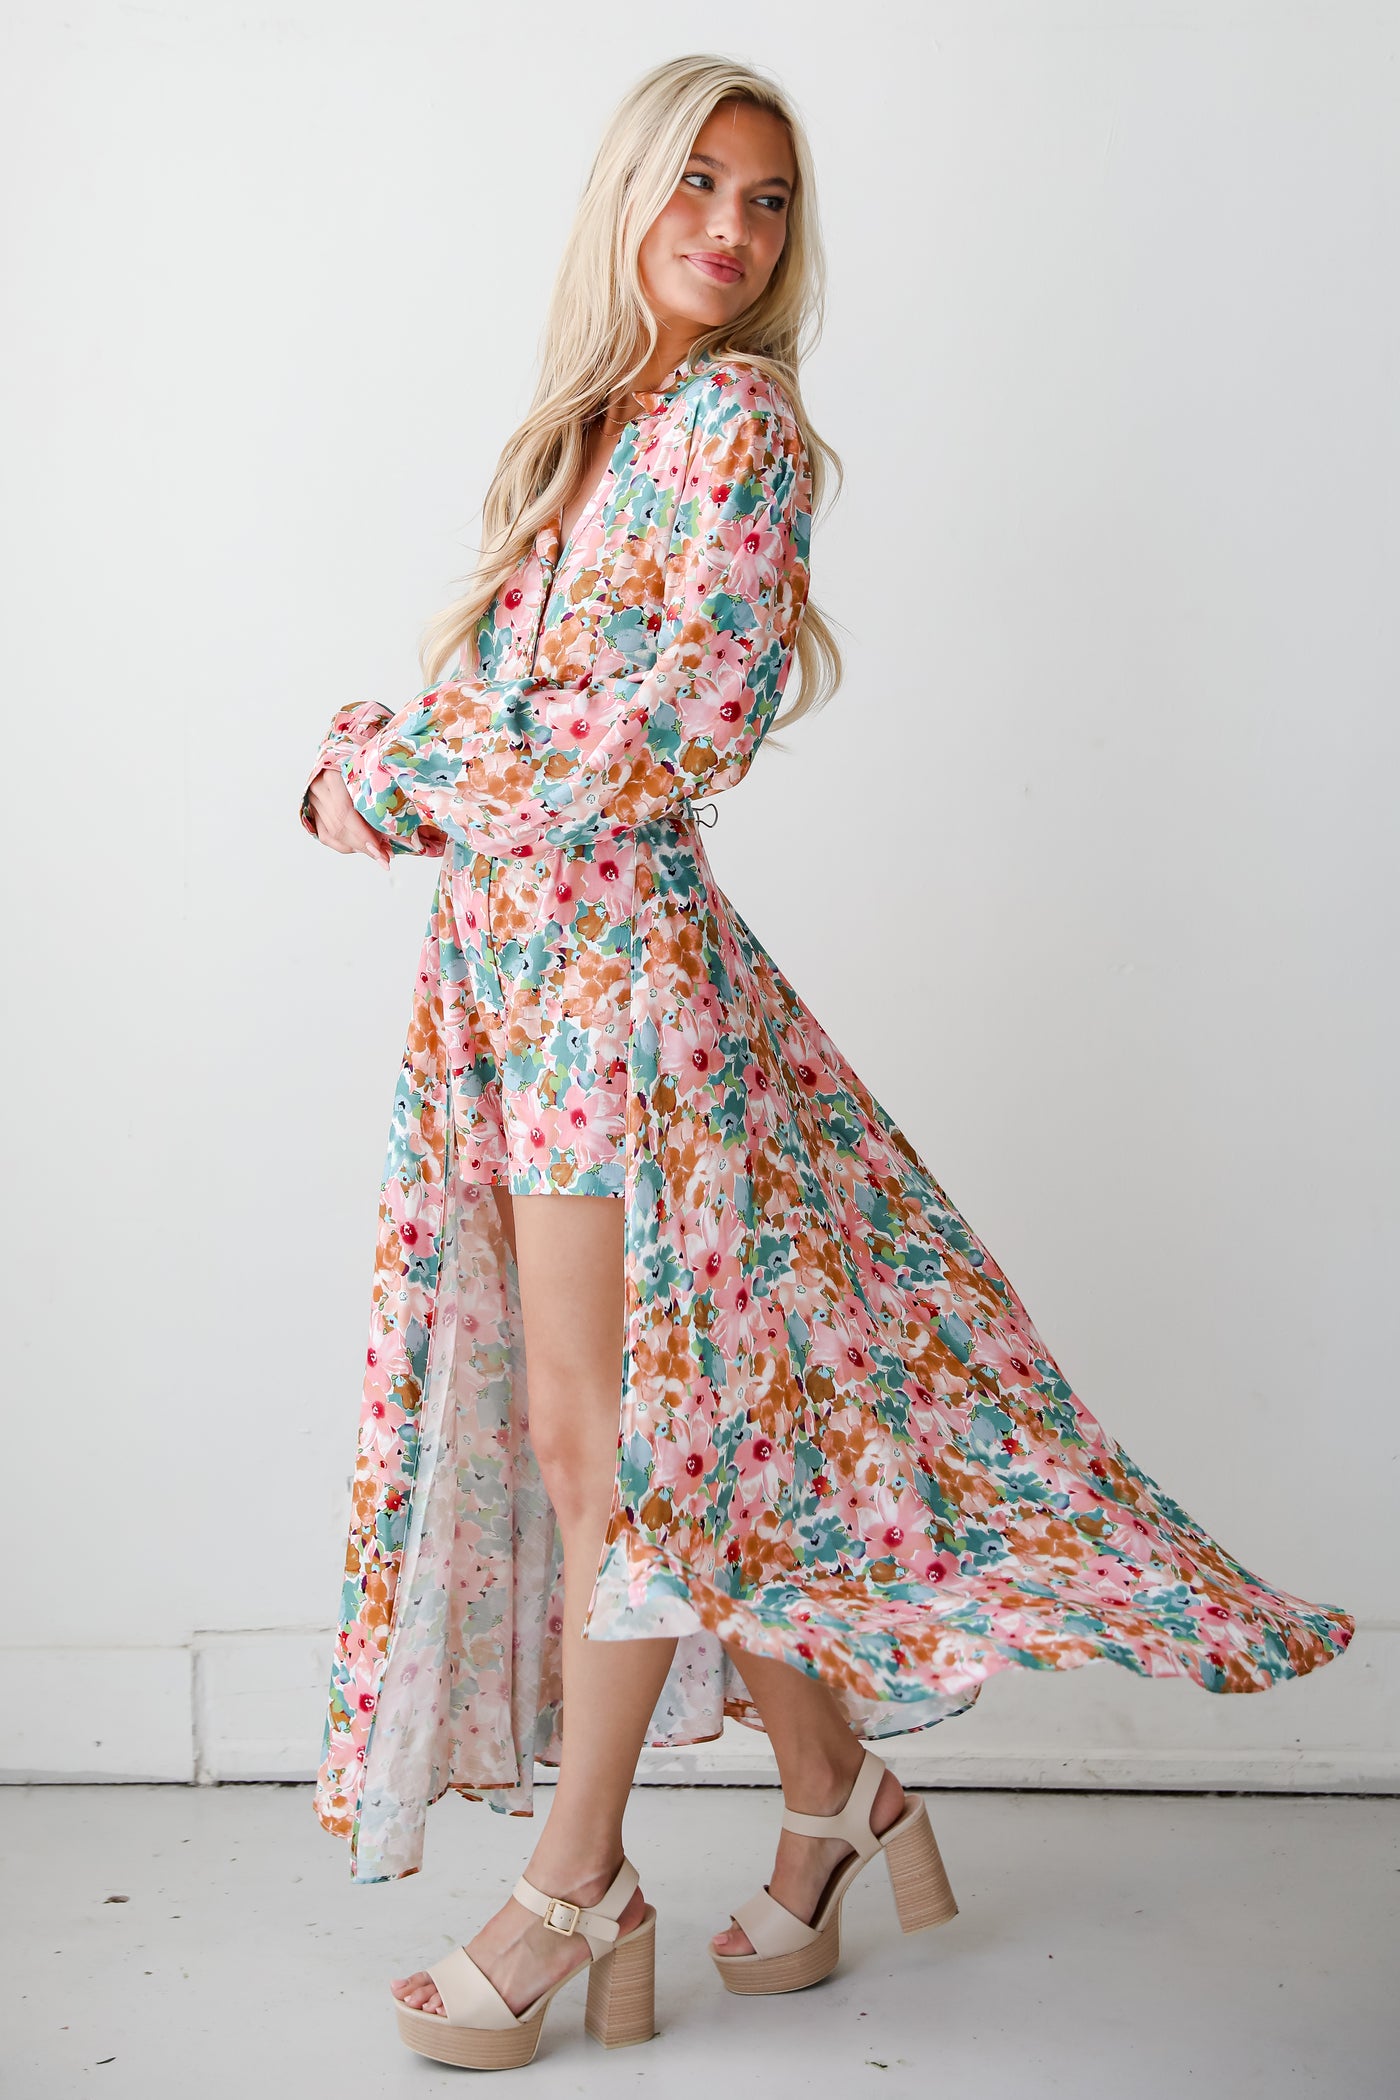 Pink Floral Maxi Dress Romper for women